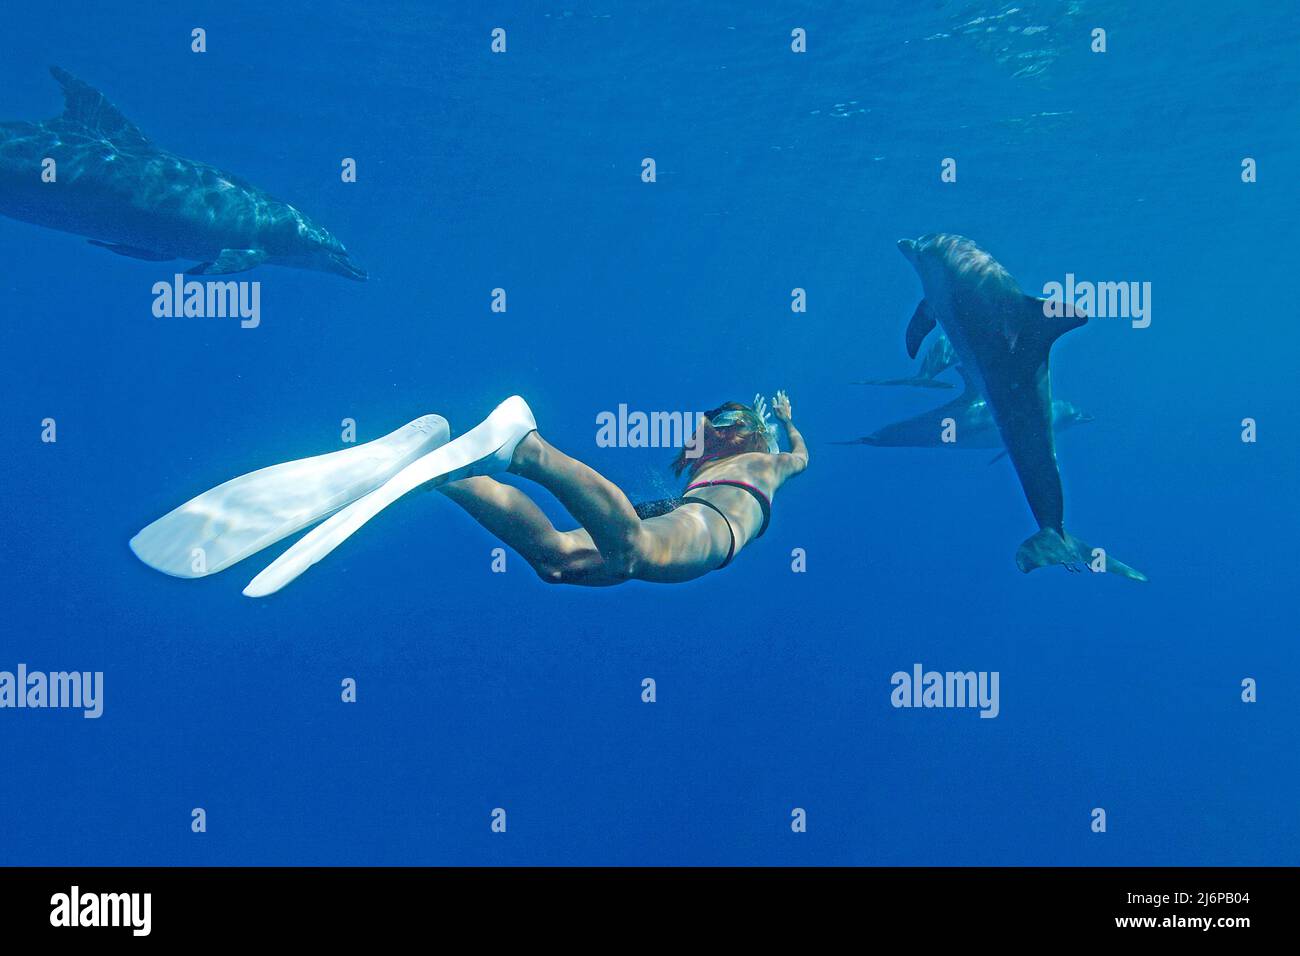 Snorkeler (woman) diving with Indo-Pacific bottlenose dolphin (Tursiops aduncus), in blue water, Maldives Indian Ocean, Asia Stock Photo